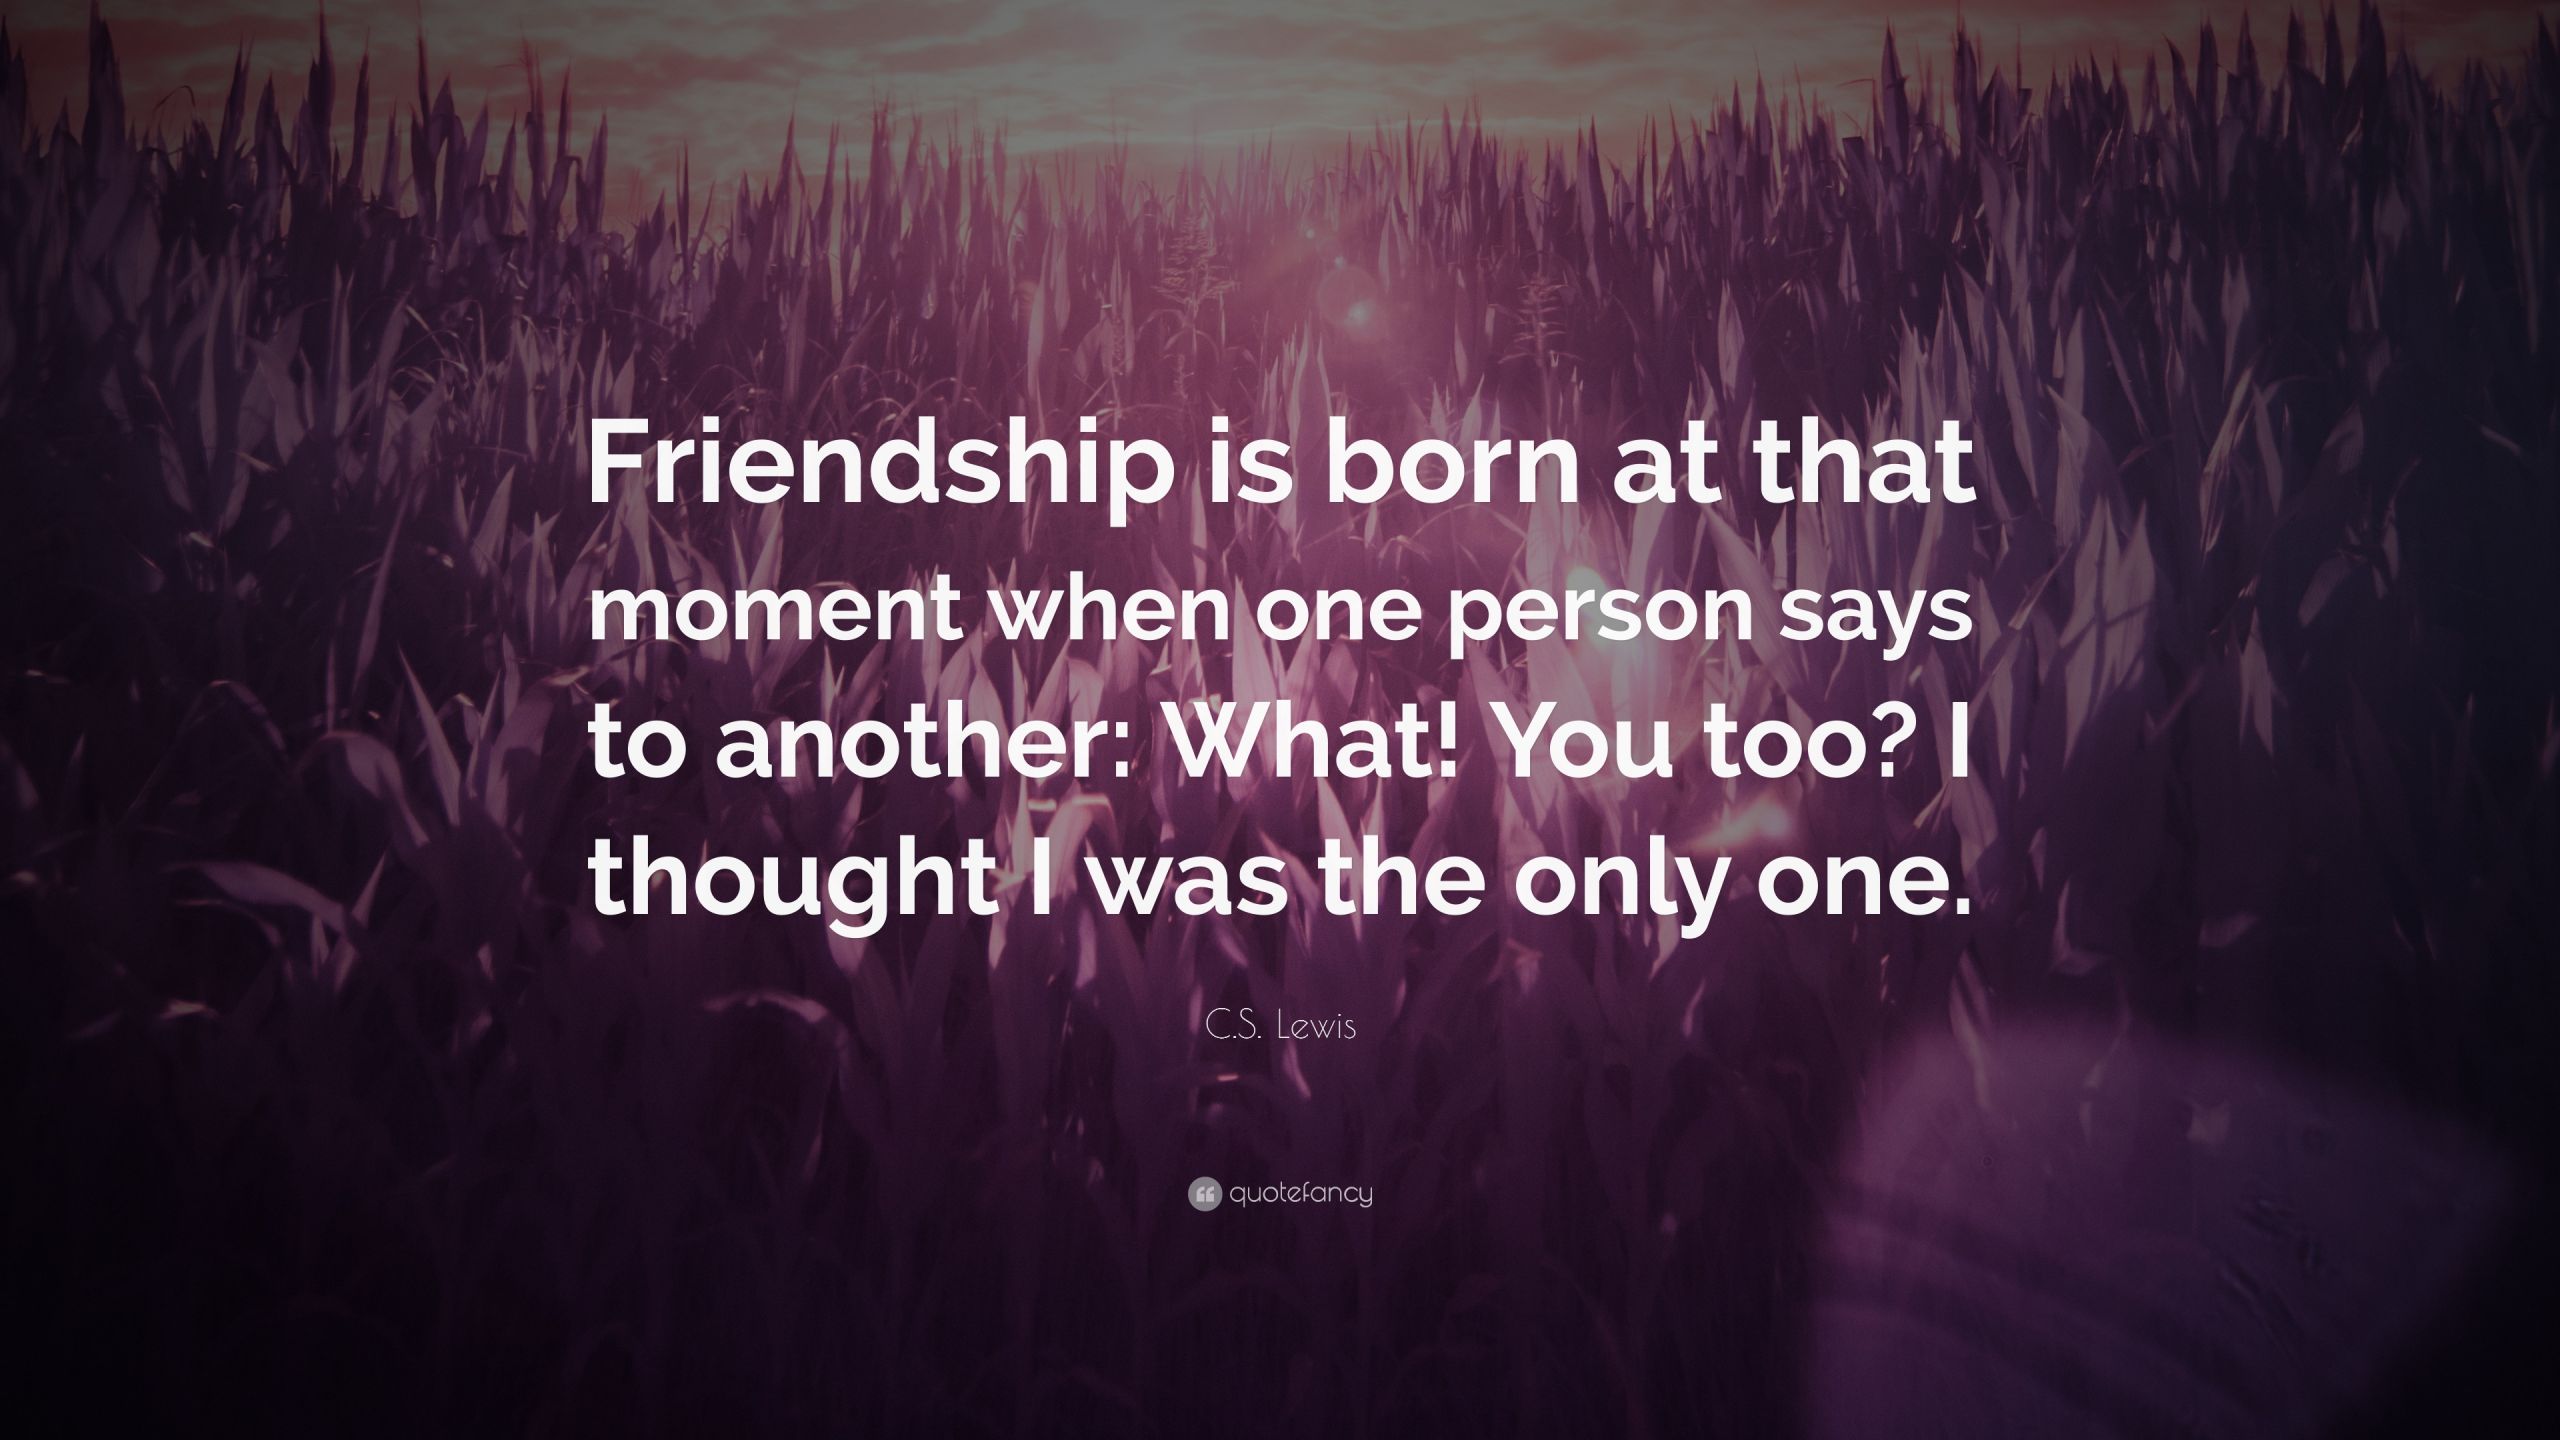 Friendship Pic Quotes
 Friendship Quotes 21 wallpapers Quotefancy